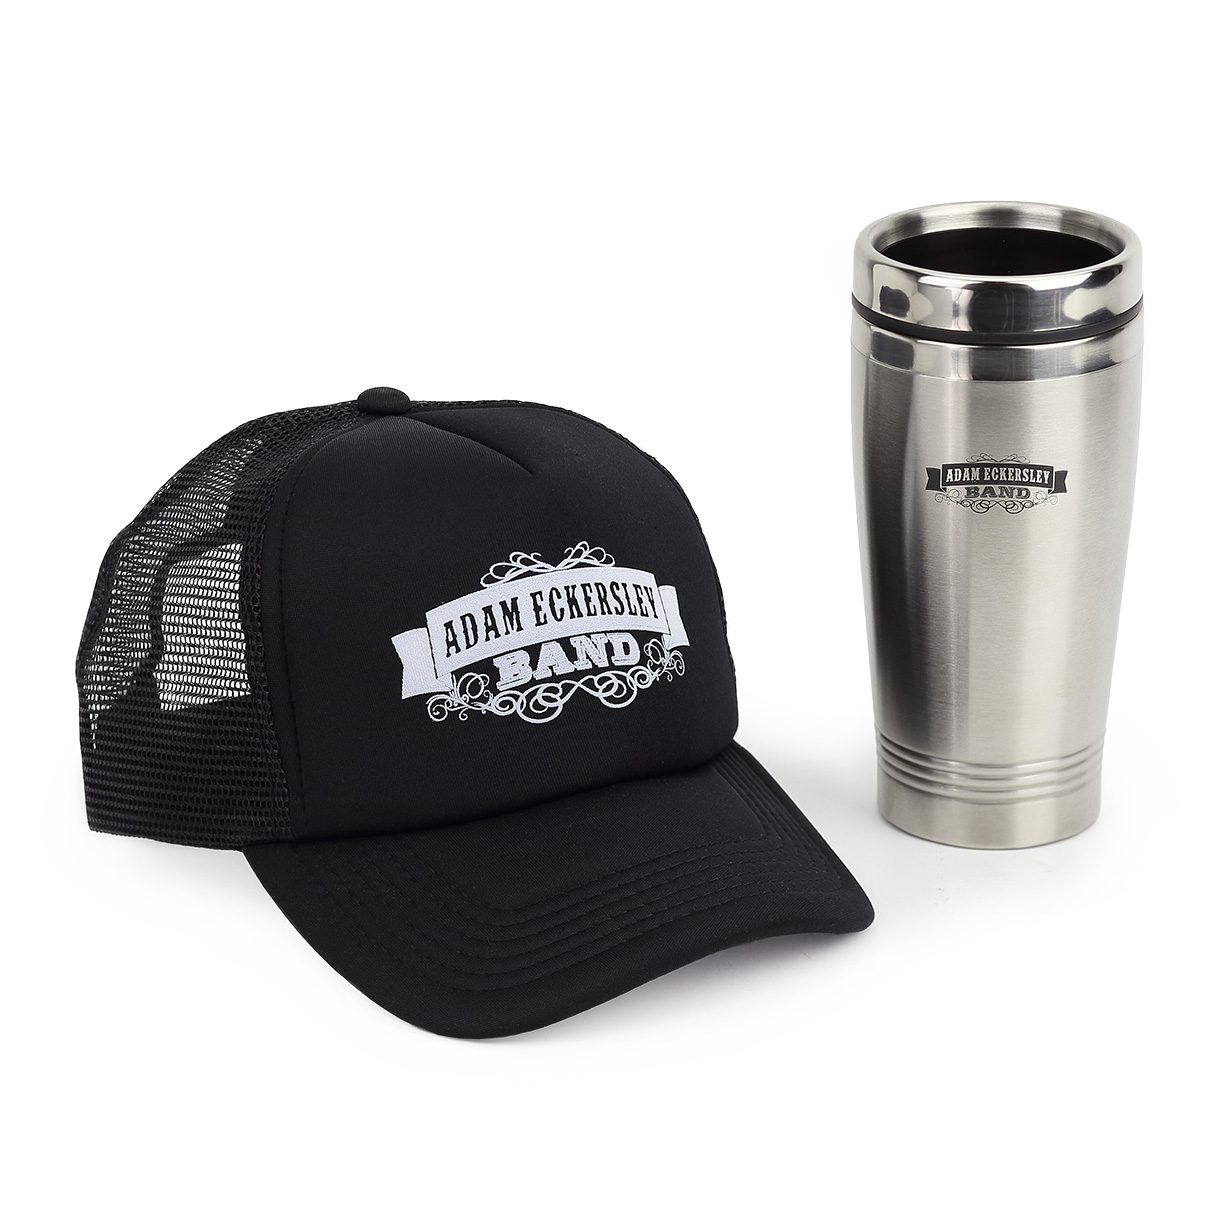 Branded Merchandise Product Photography Example